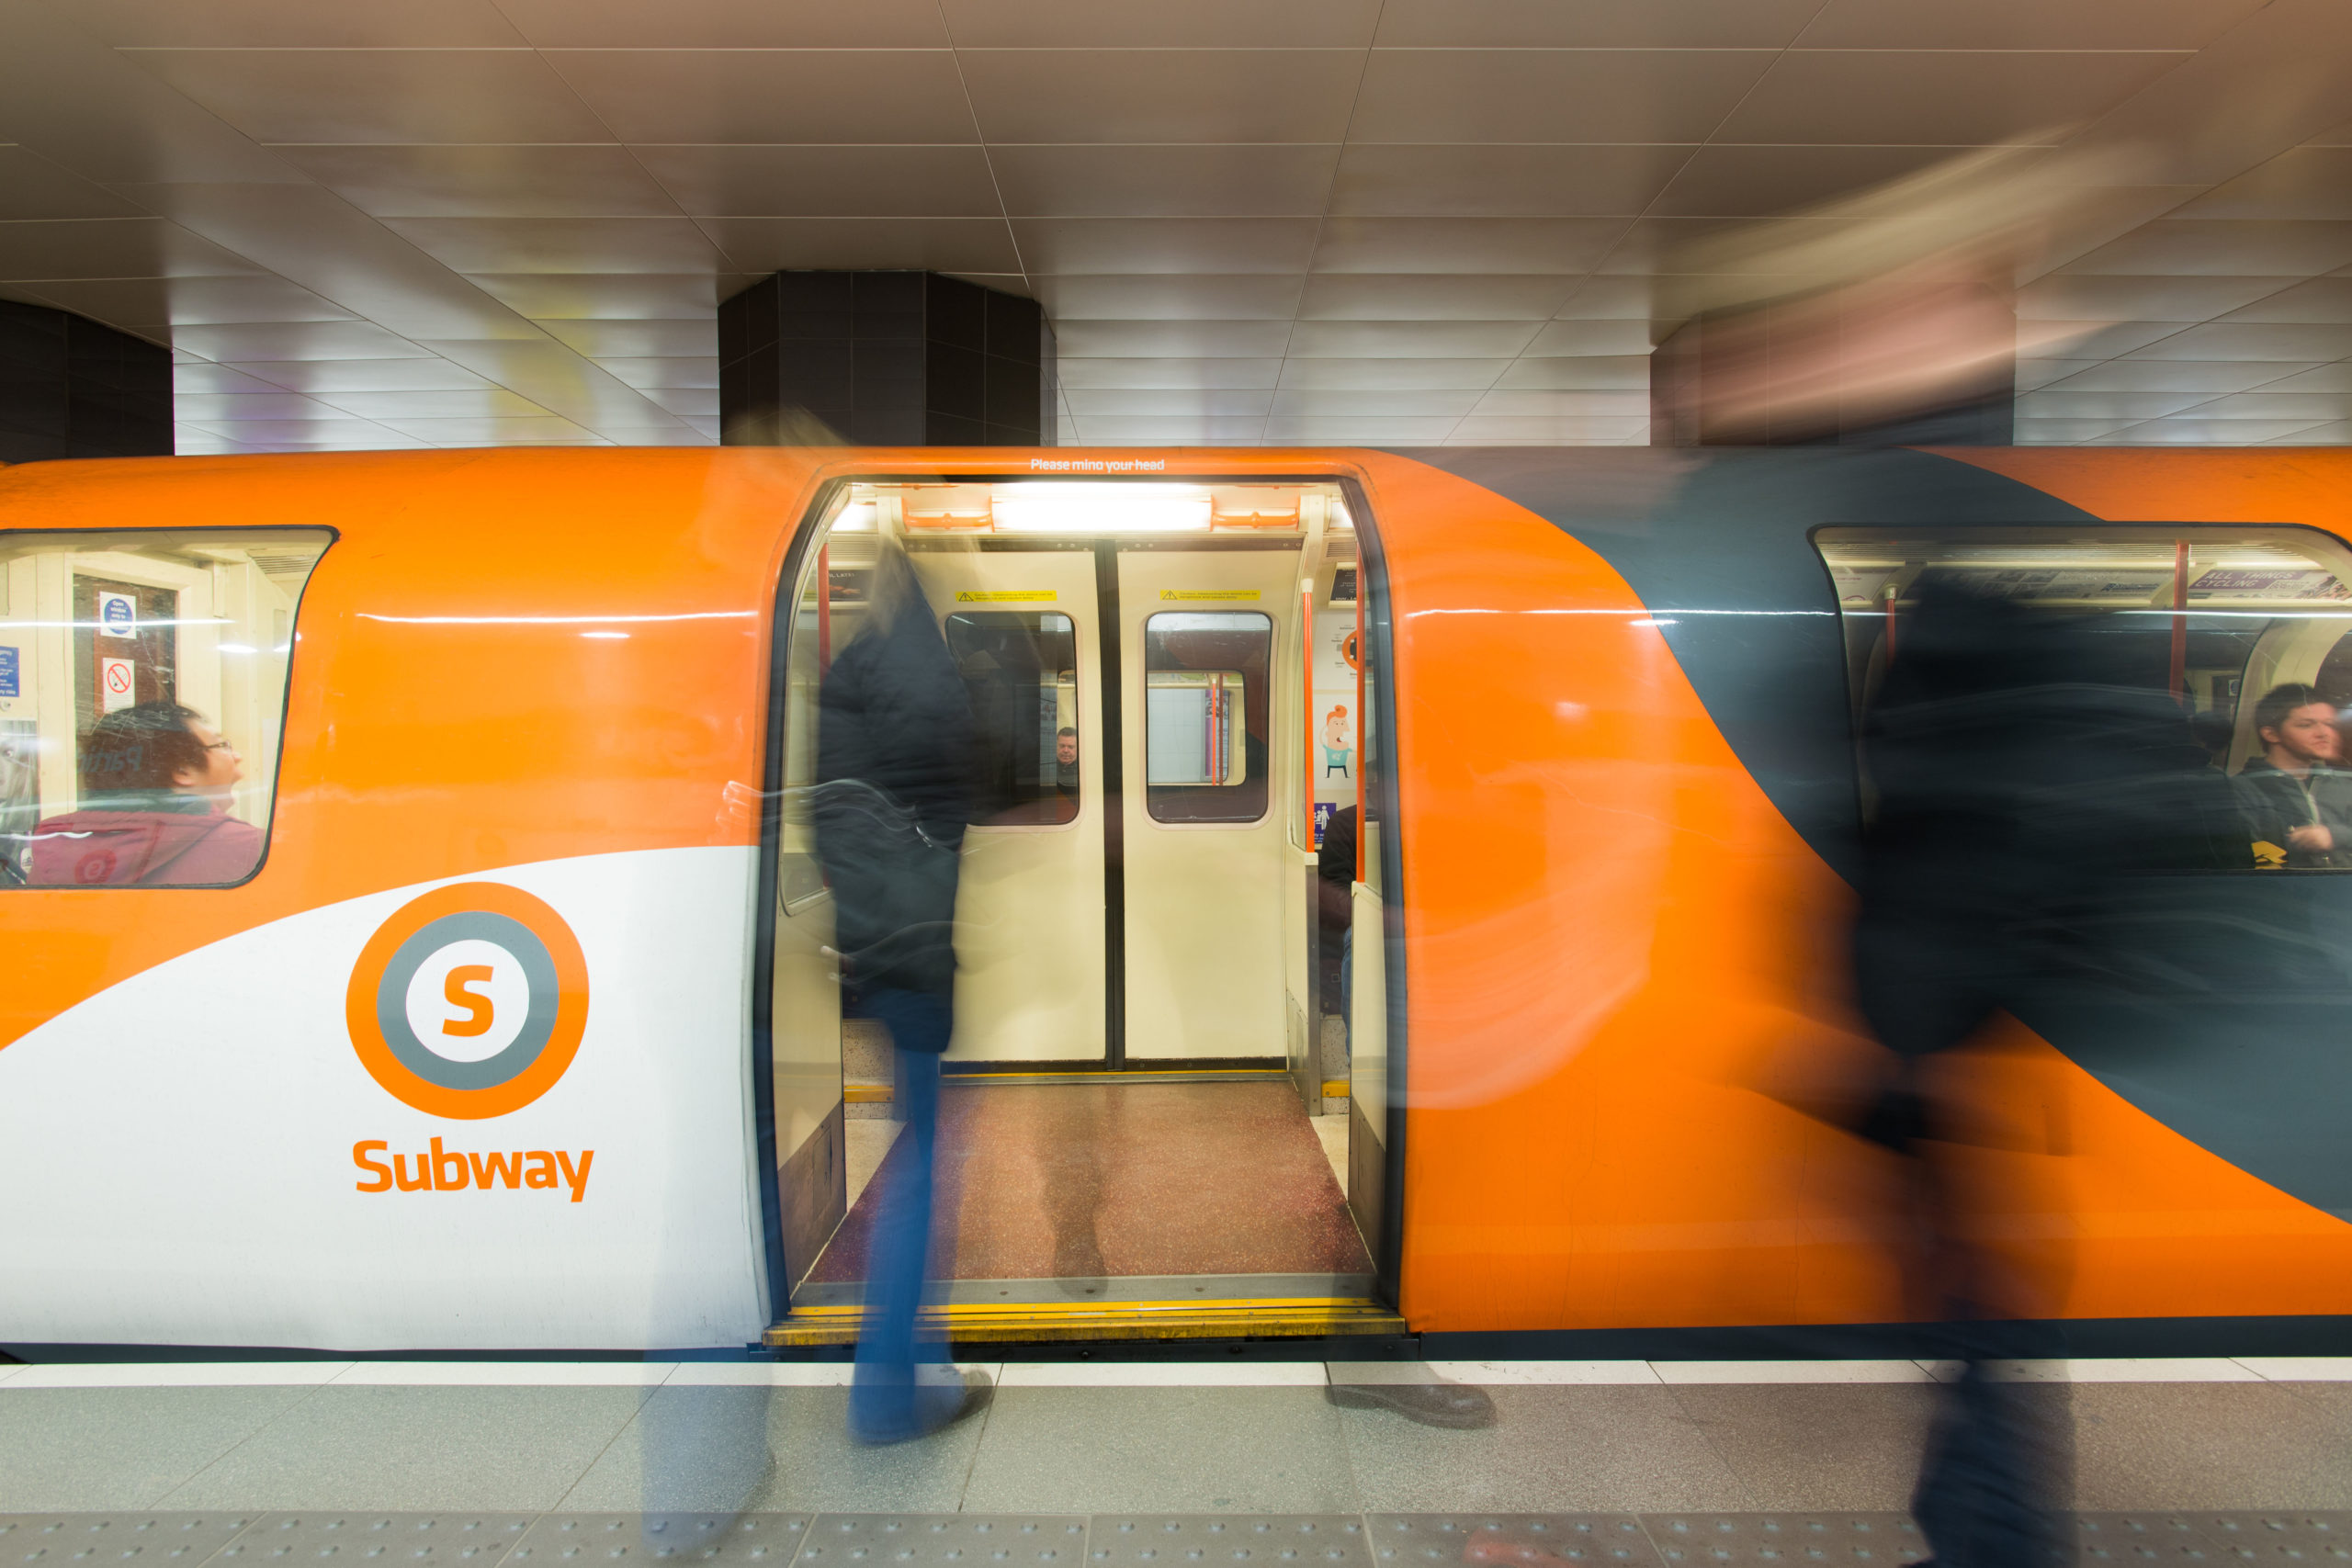 Glasgow Subway: Services will close early from Wednesday night.